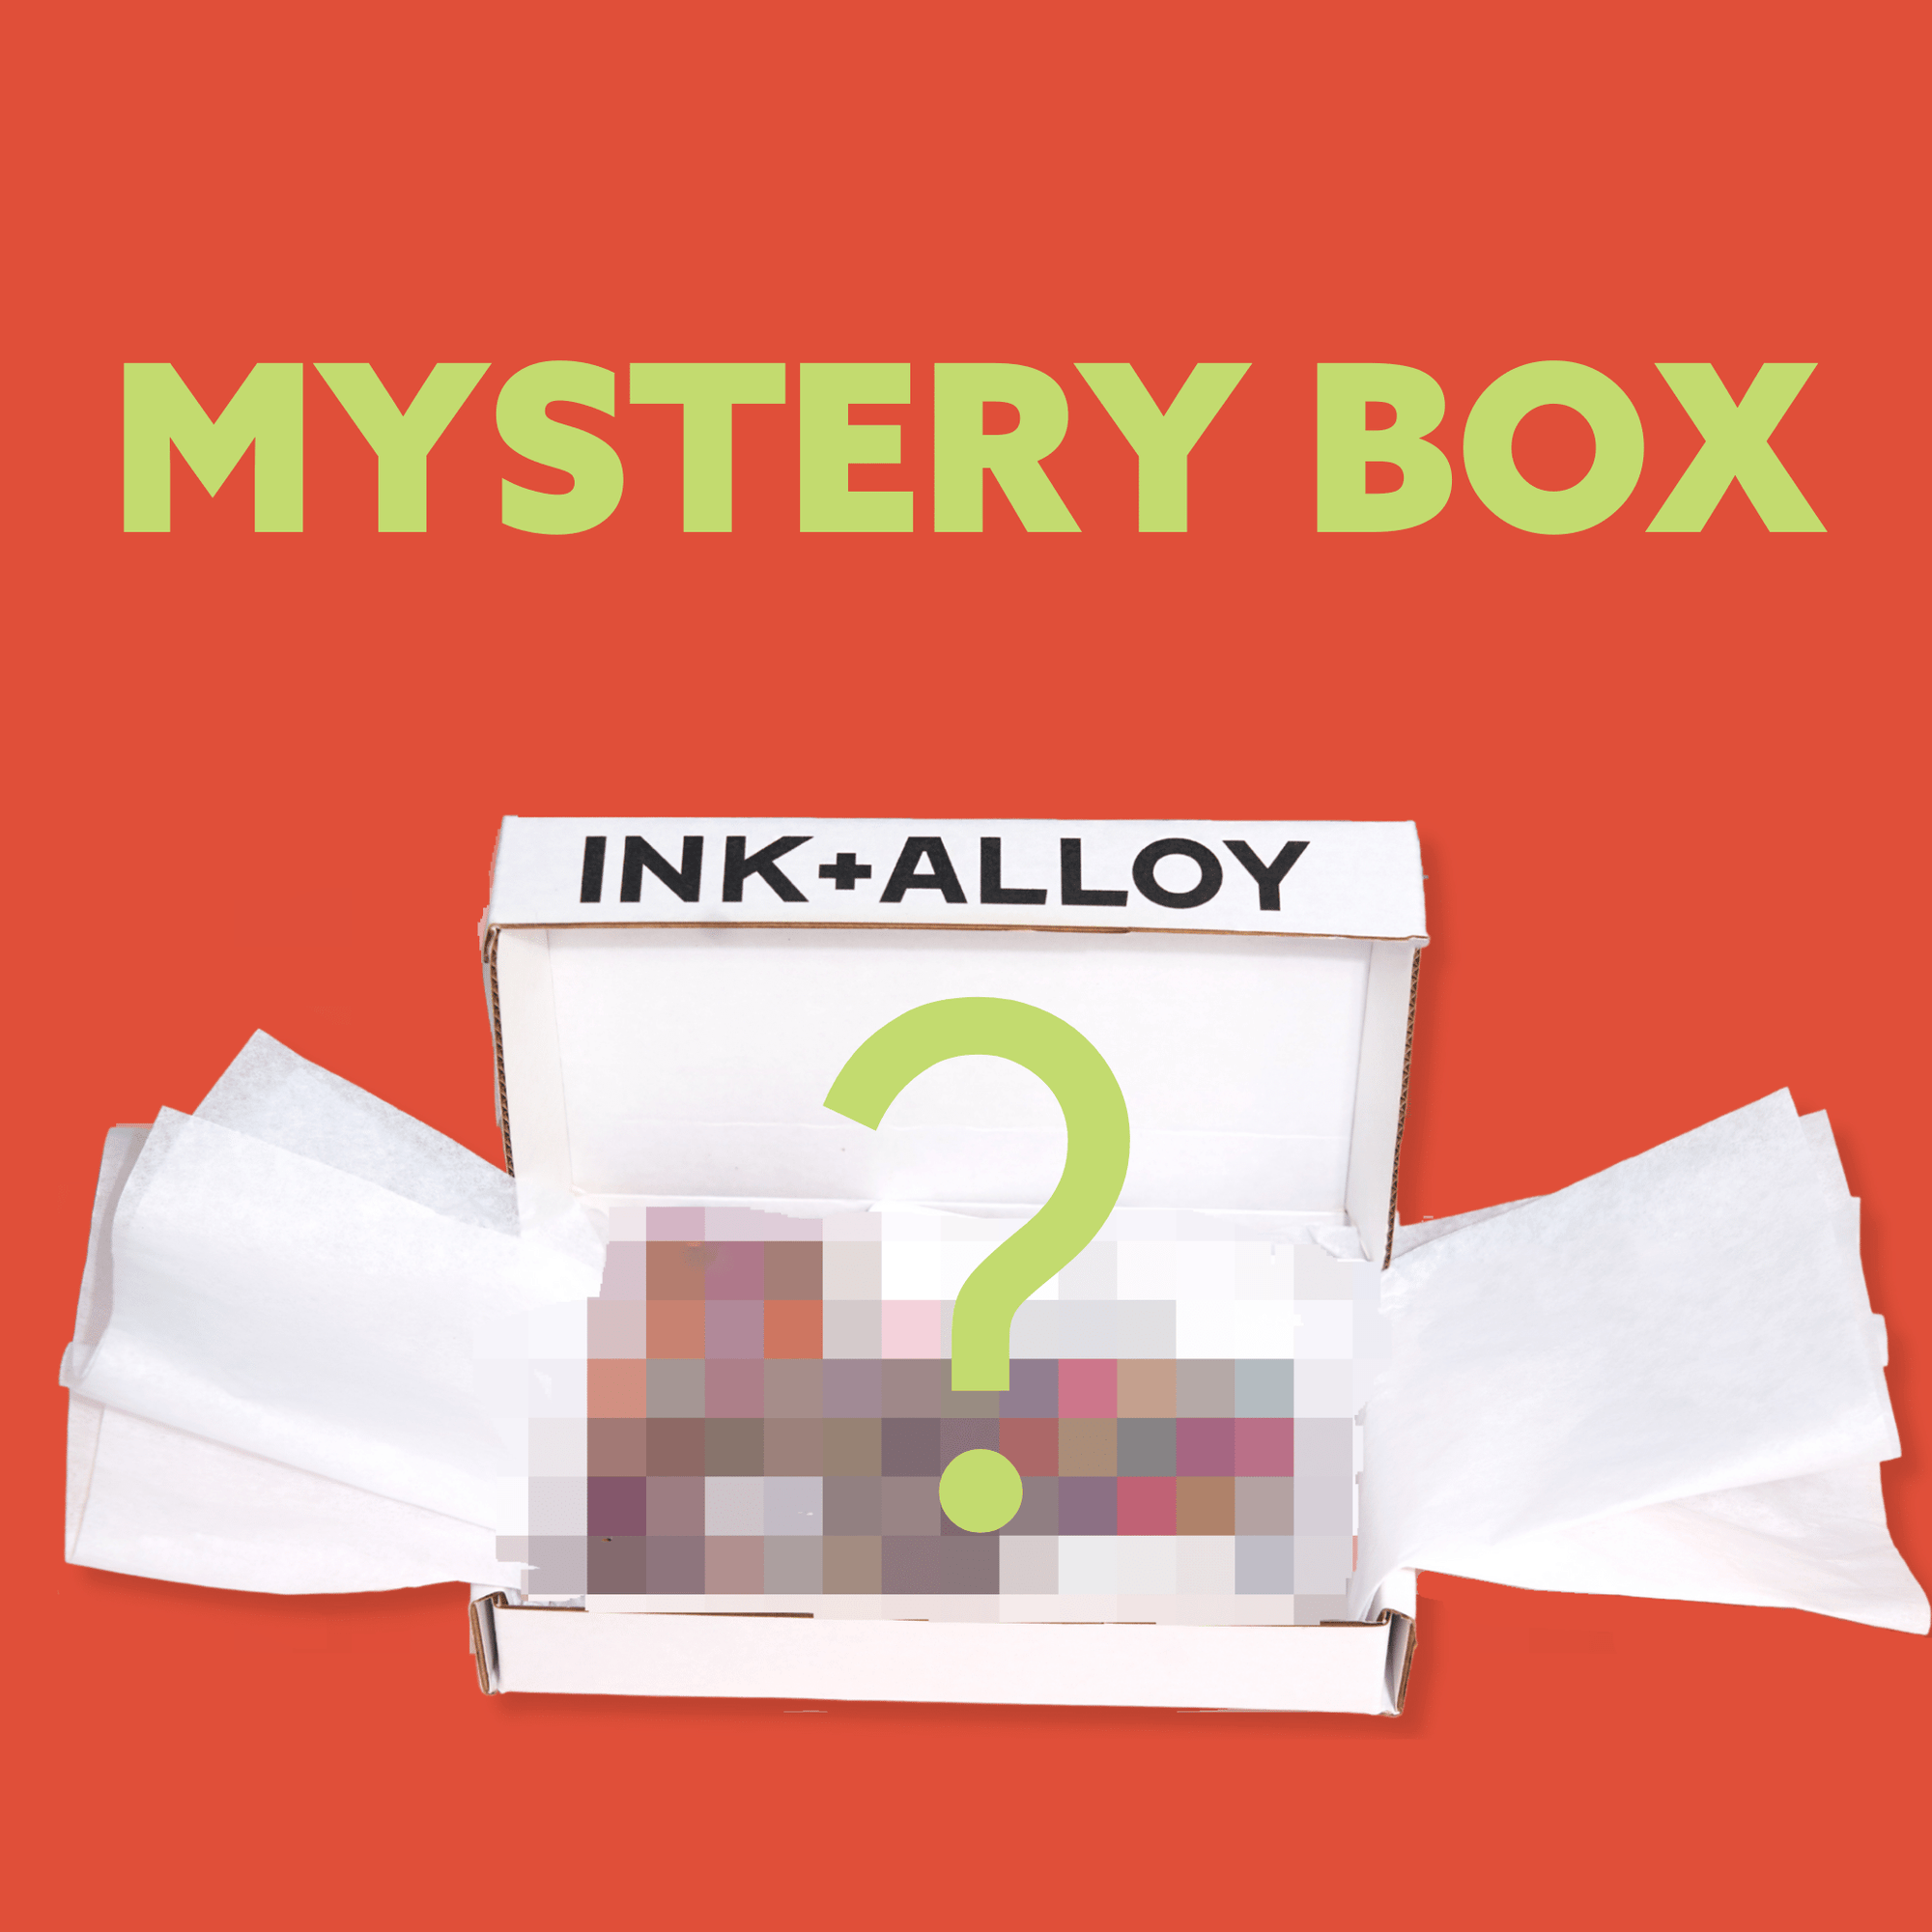 Show Special Mystery Box